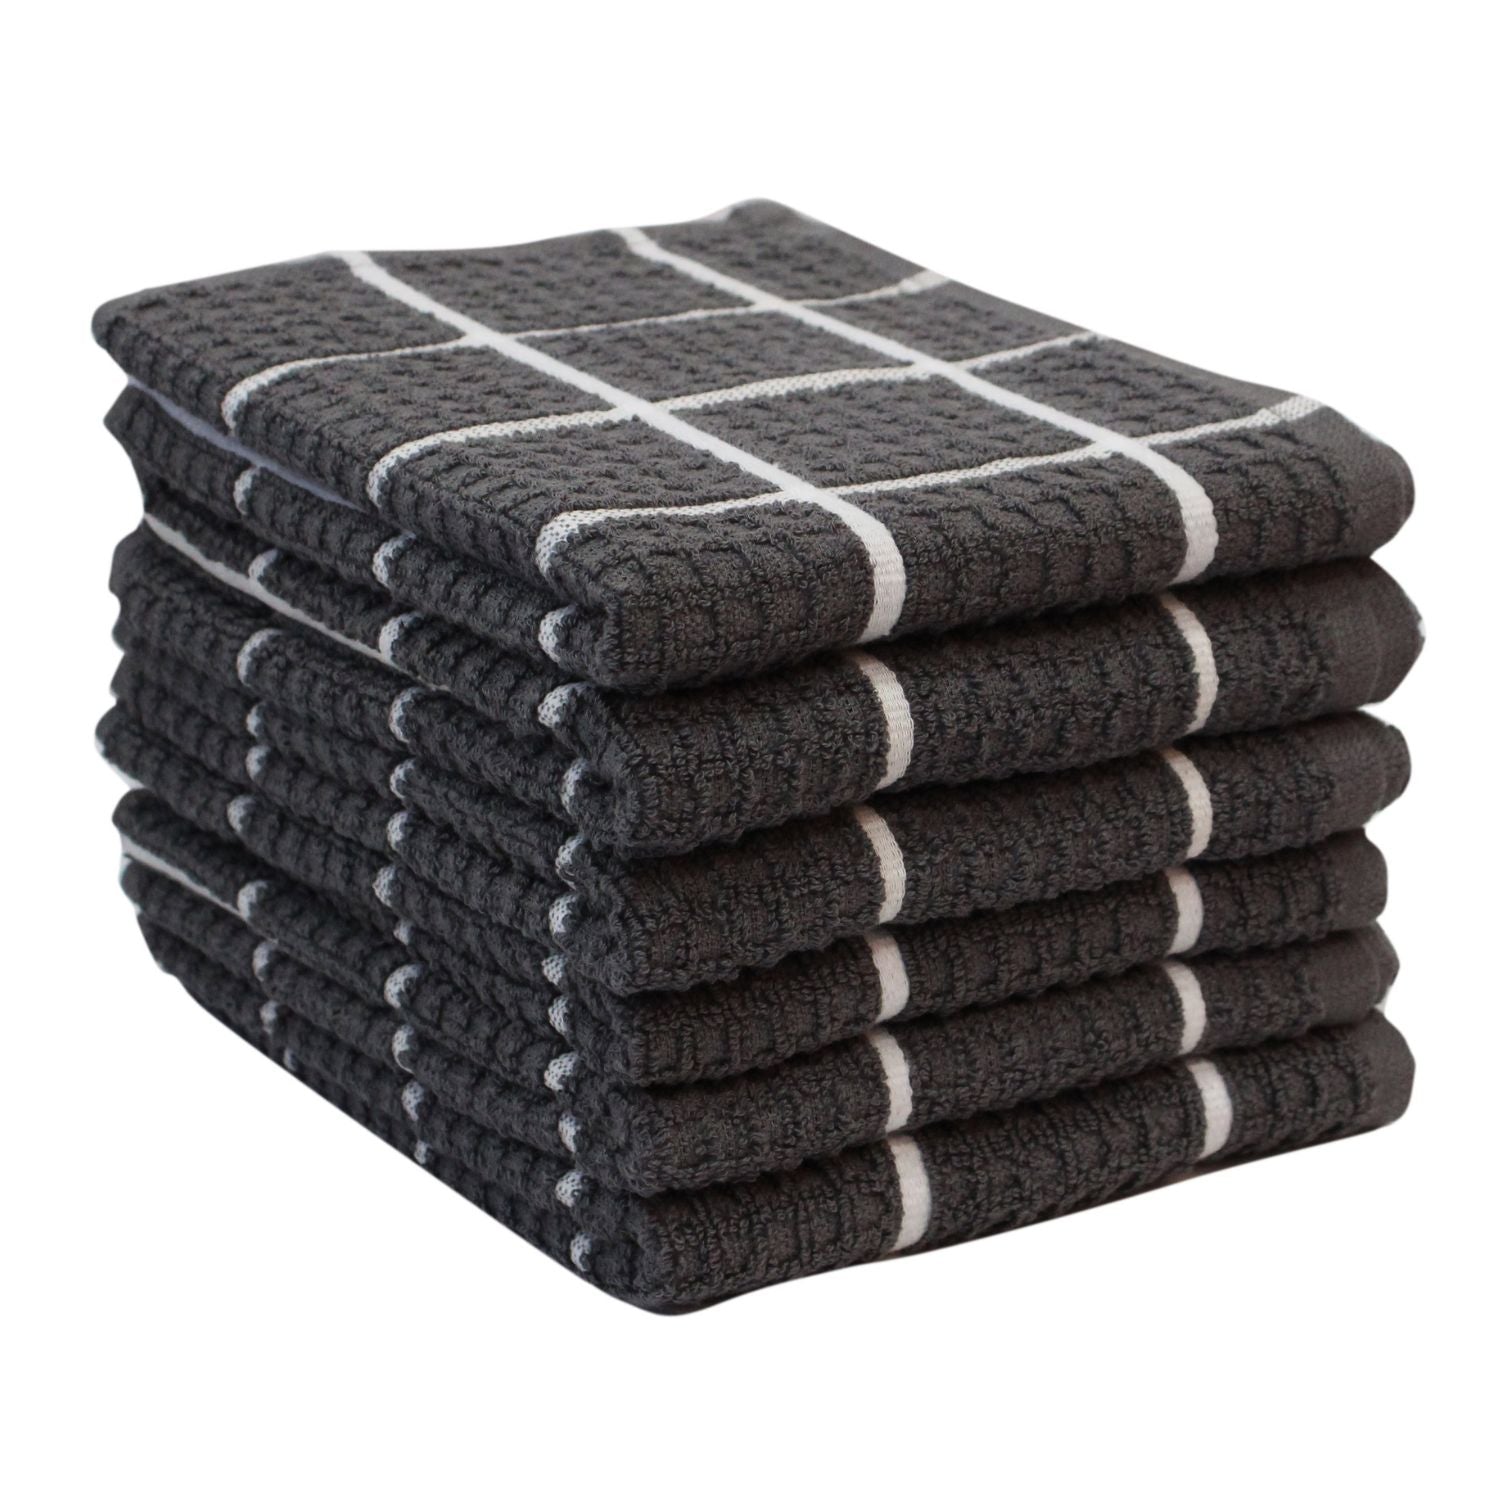 Lushomes Kitchen Cleaning Cloth, Terry Cotton Dish Machine Washable Towels for Home Use, 6 Pcs Grey Checks Hand Towel, Pack of 6 Towel, 16x26 Inches, 360 GSM  (40x65 Cms, Set of 6, Napking for Hand Towels )